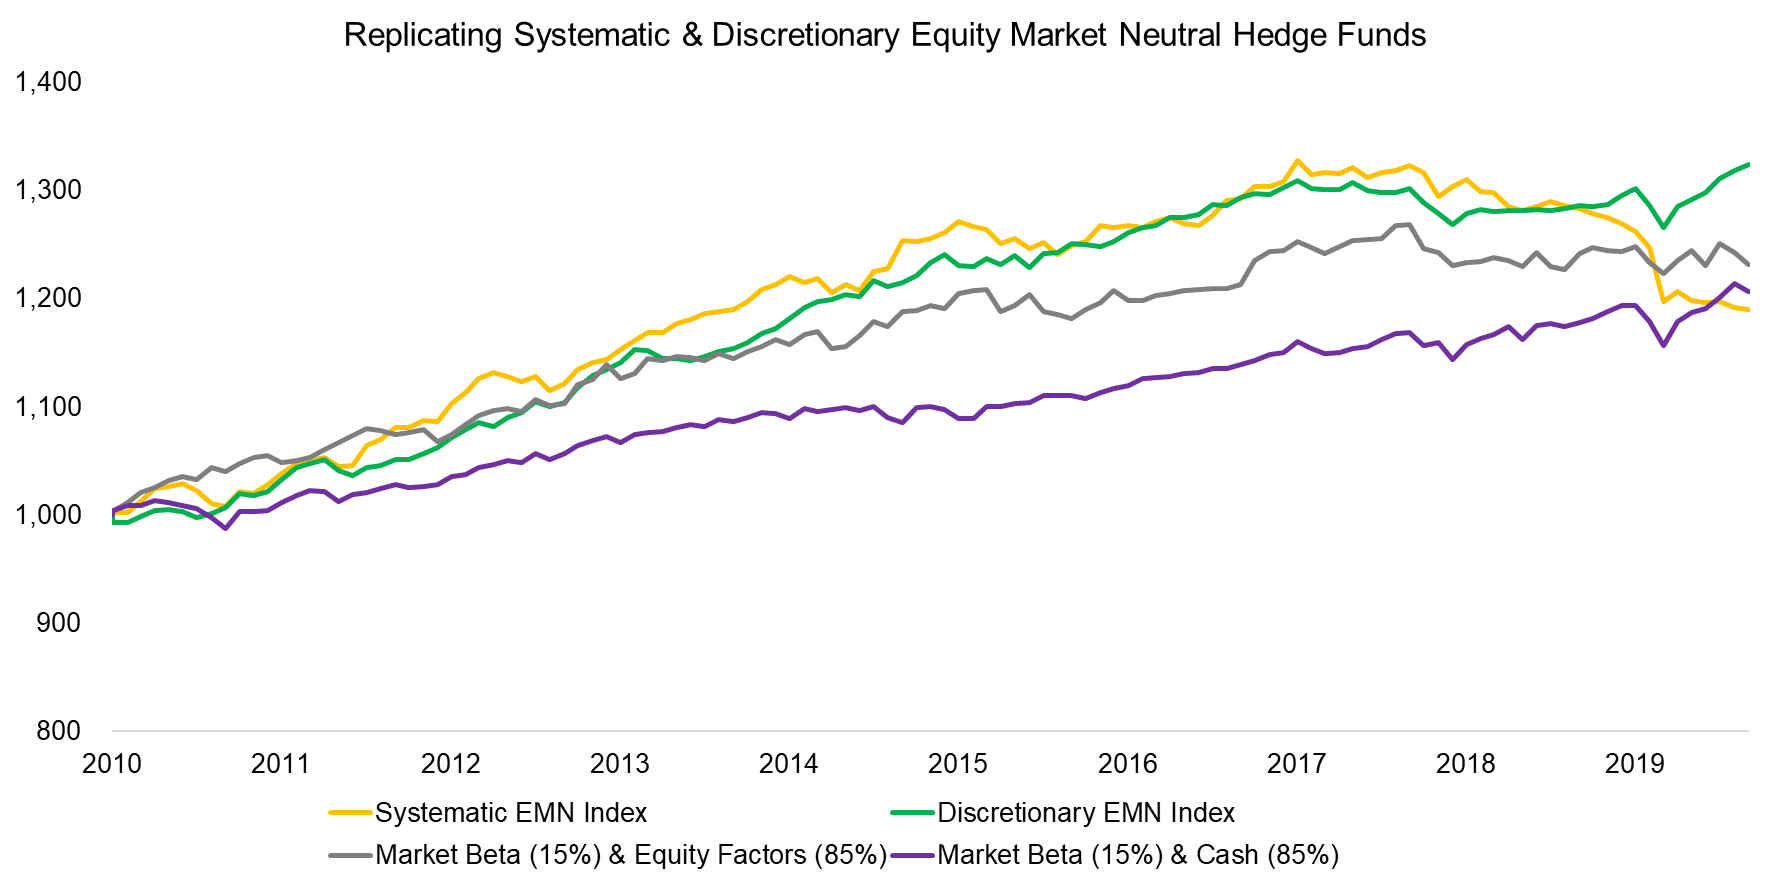 Replicating Systematic & Discretionary Equity Market Neutral Hedge Funds